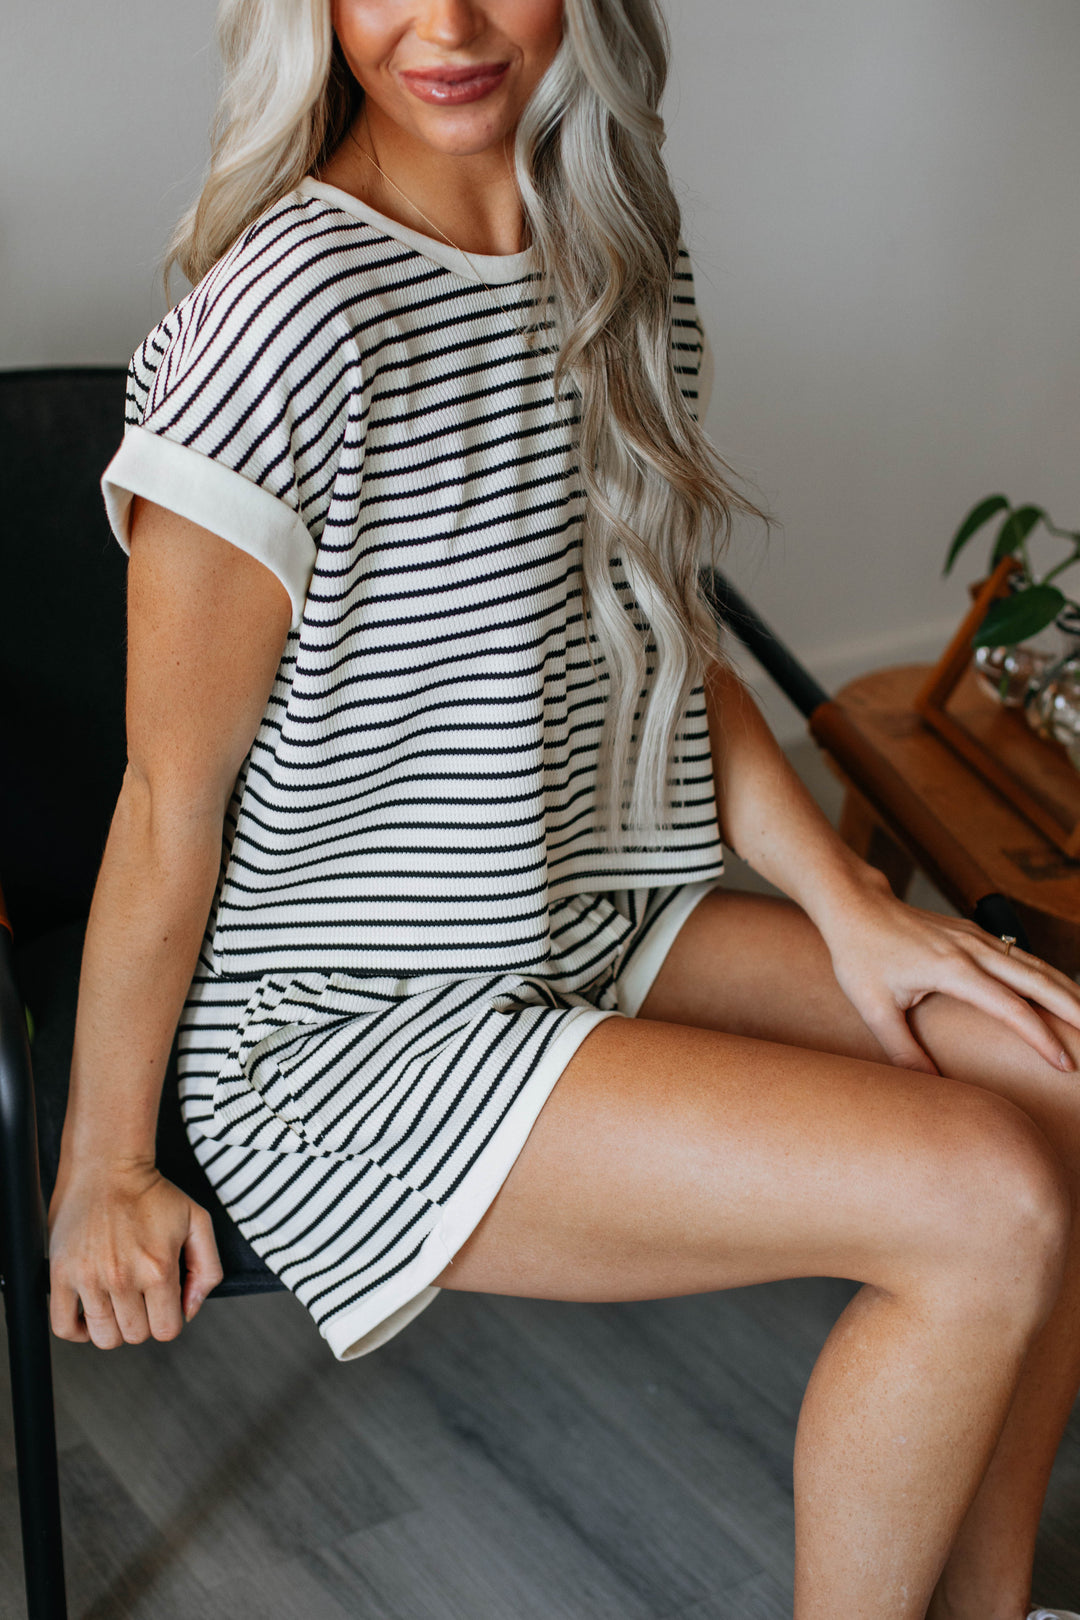 Fawn Striped Shorts